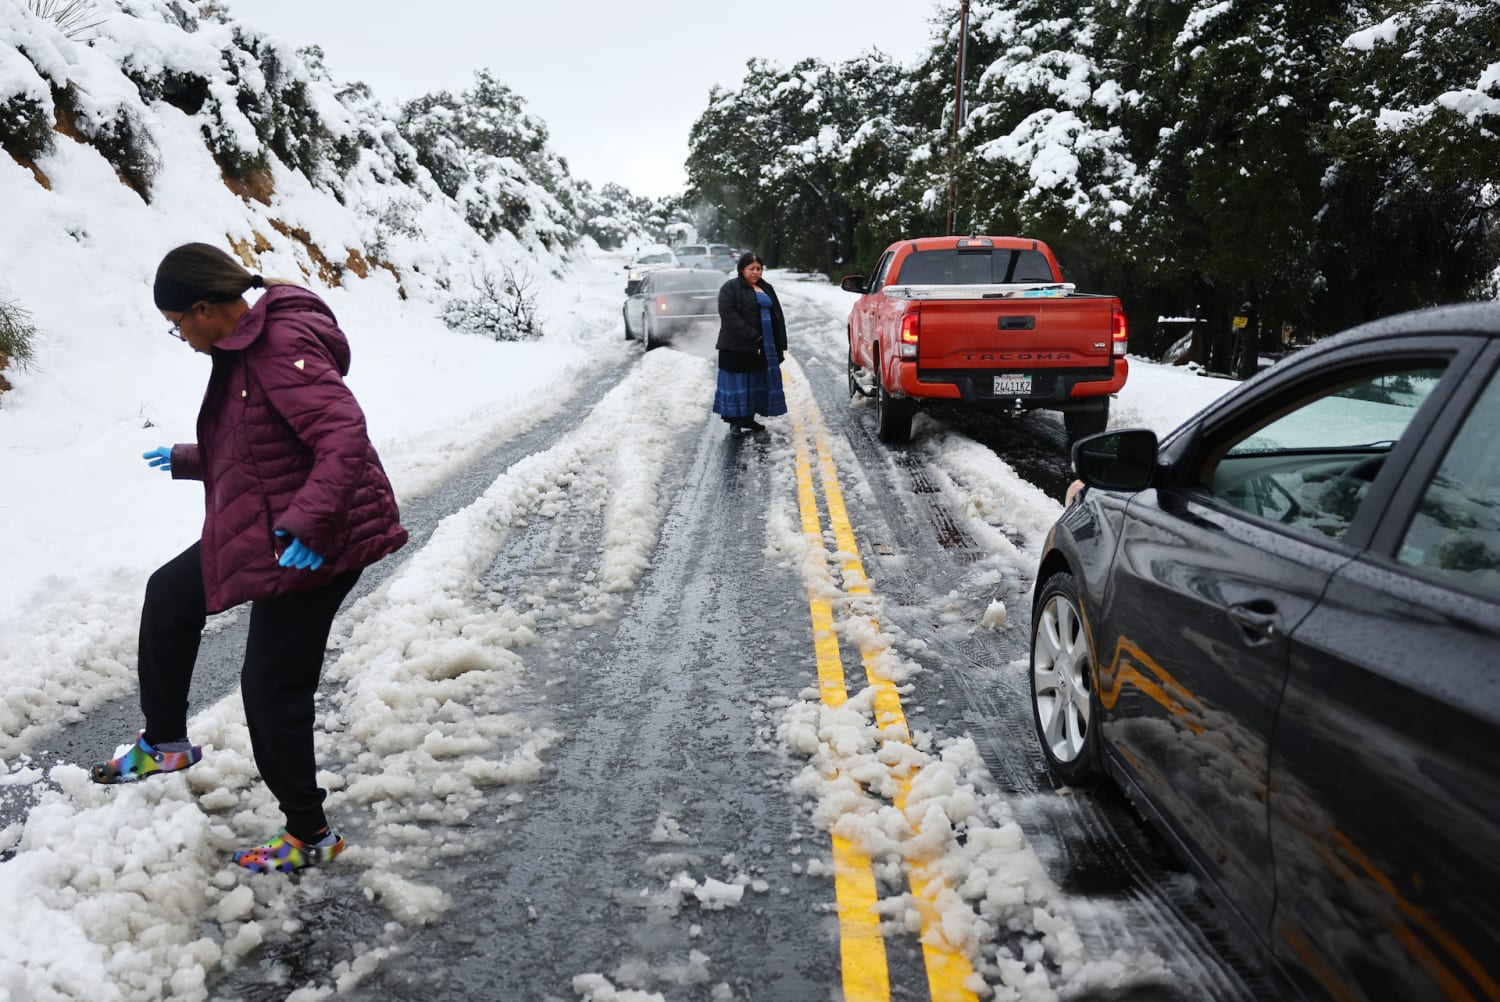 Winter storm in California leaves thousands without power and snow even